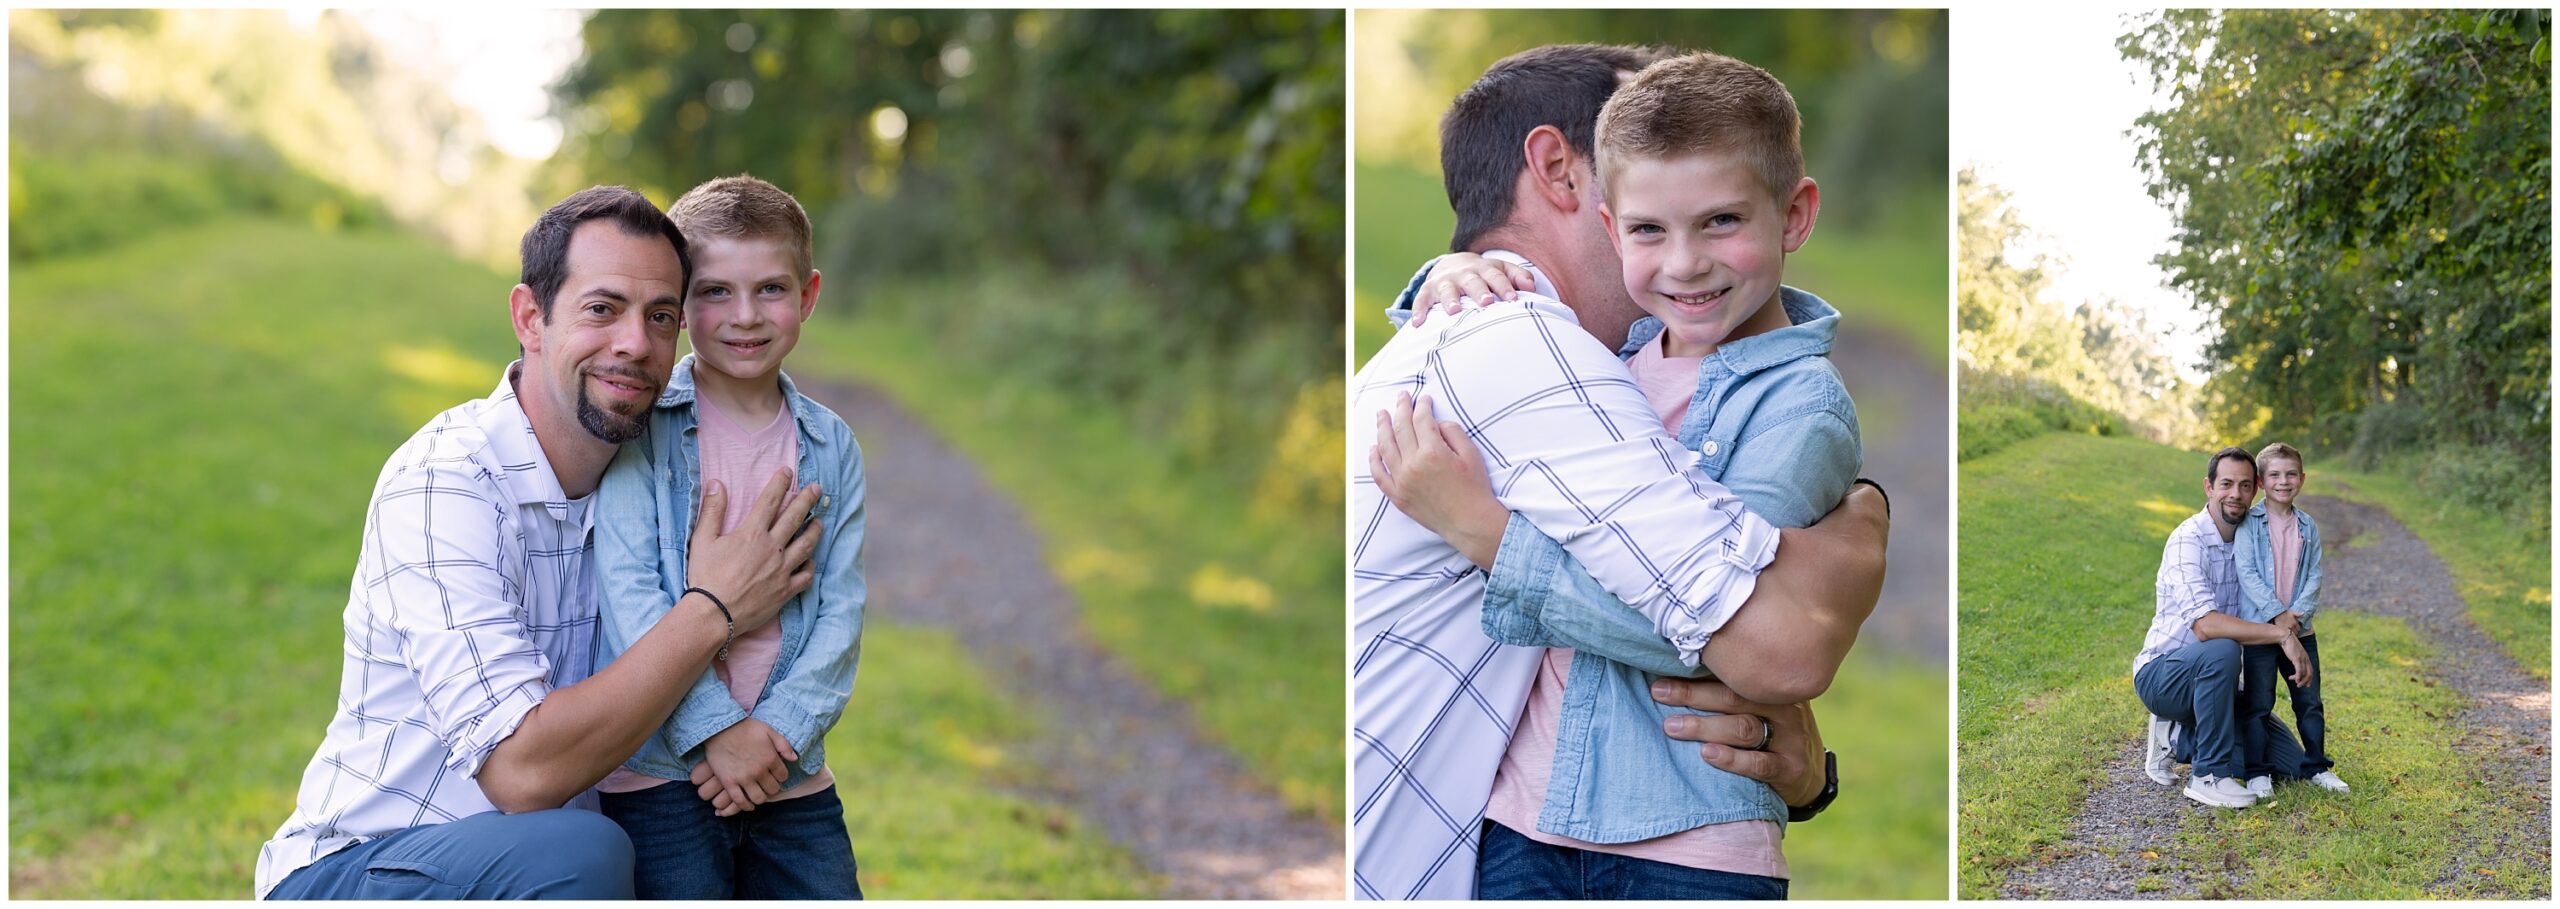 Outdoor Family Portrait Session in Boyce Park located in Plum, PA 